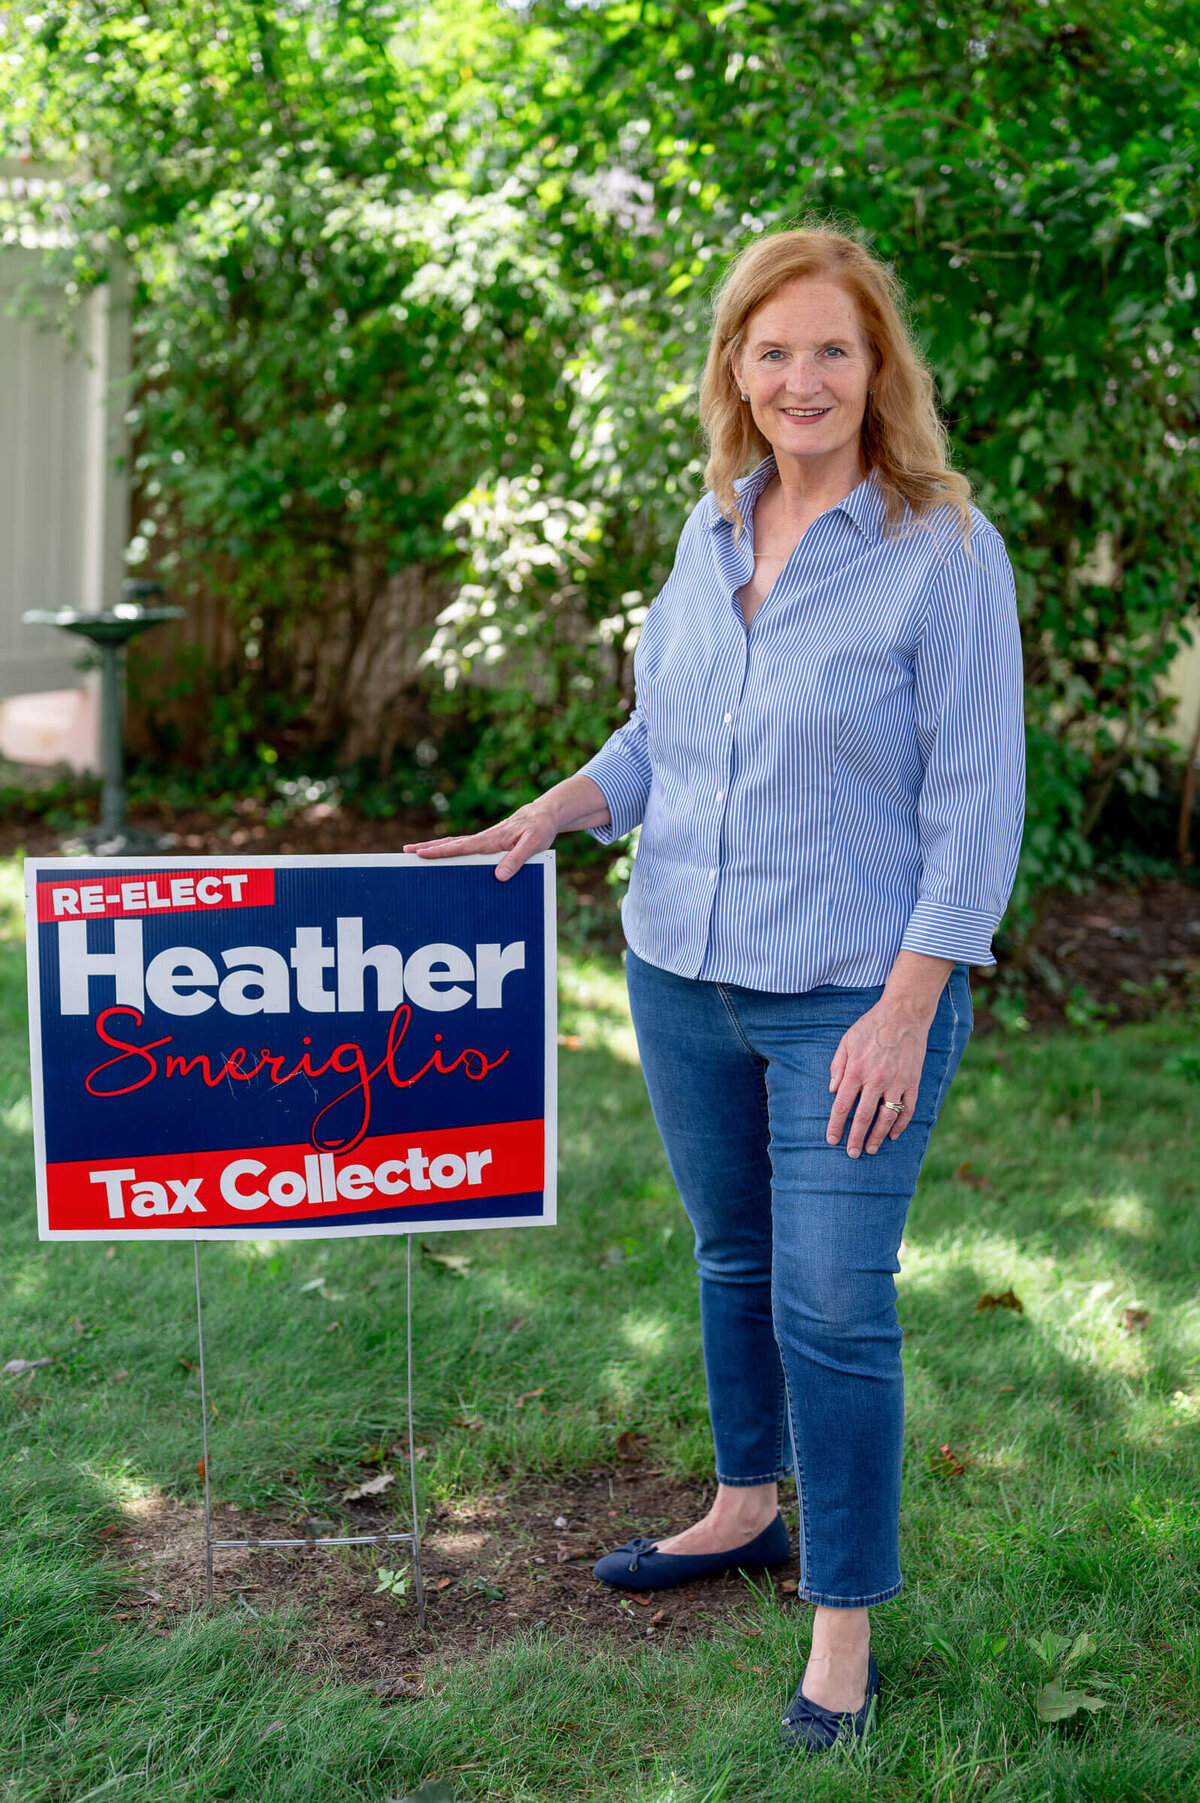 Woman standing next to a re-election campaign poster, posing for her own re-election campaign in Greenwich, CT.